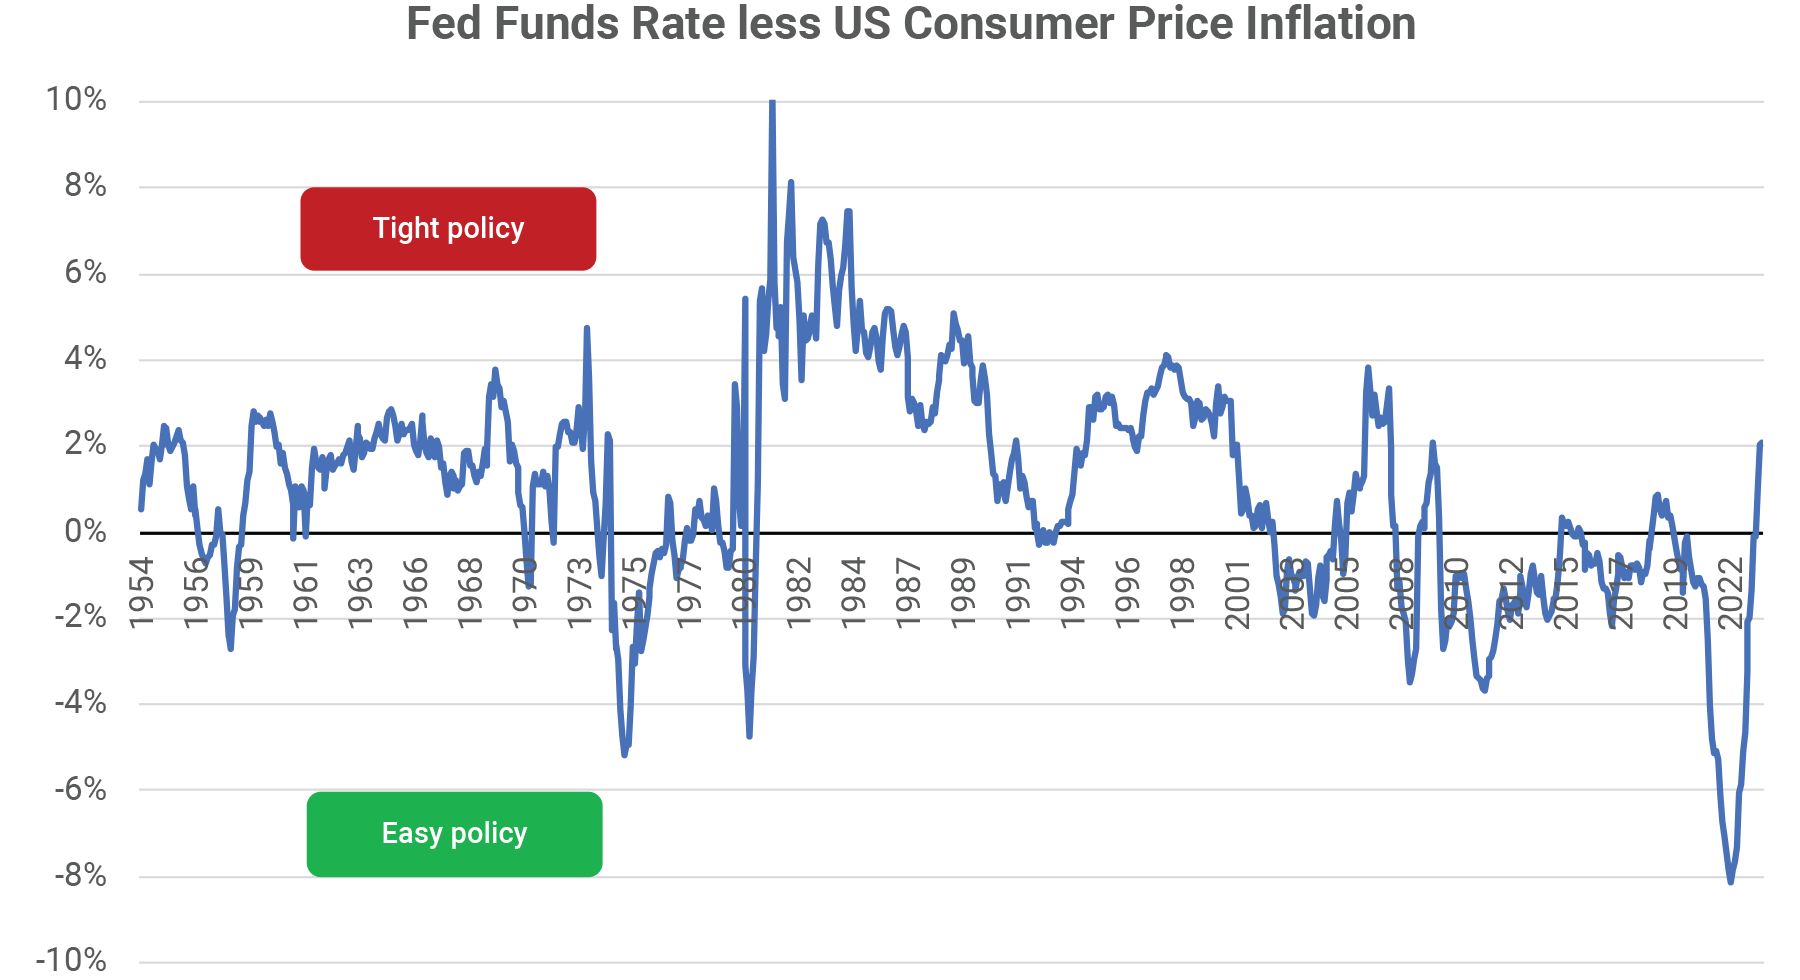 Fed Funds Rate Less US Consumer Price Inflation